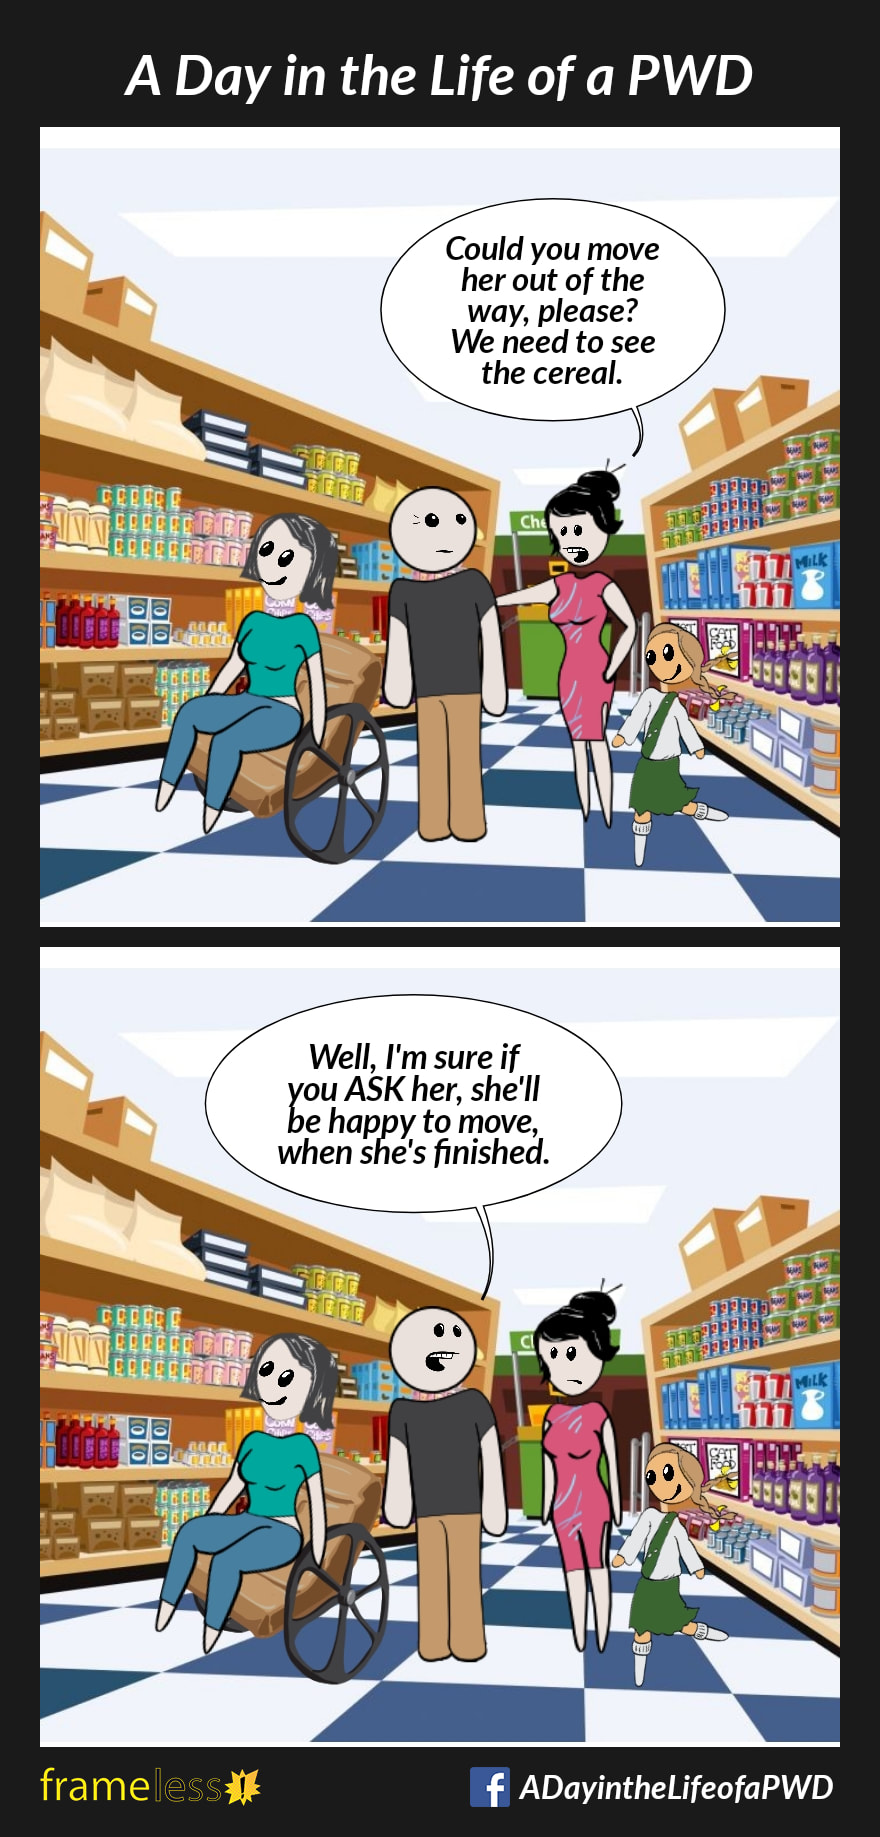 COMIC STRIP 
A Day in the Life of a PWD (Person With a Disability) 

Frame 1:
A woman in a wheelchair and her friend are in a grocery store looking at the cereal.
A mother with her daughter is in the same isle.
MOTHER (to friend): Could you move her out of the way, please? We need to see the cereal.

Frame 2:
FRIEND: Well, I'm sure if you ASK her, she'll be happy to move, when she's finished.